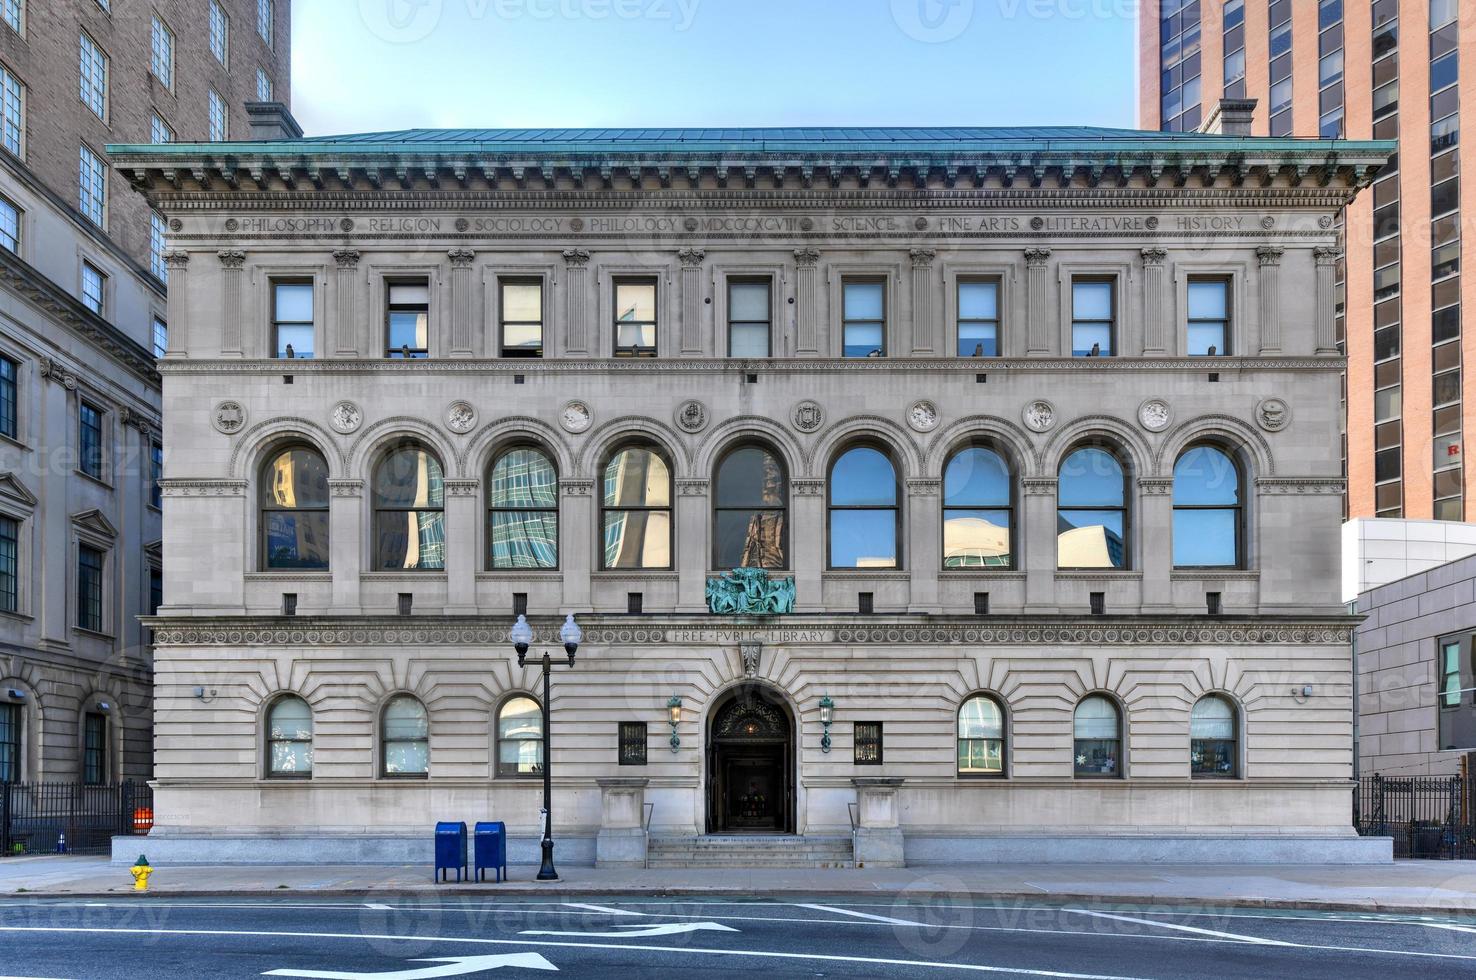 Newark Public Library, main branch. An architectural marvel, the building, designed by Rankin and Kellogg, was influenced by the 15th century Palazzo Strozzi in Florence, Italy. photo